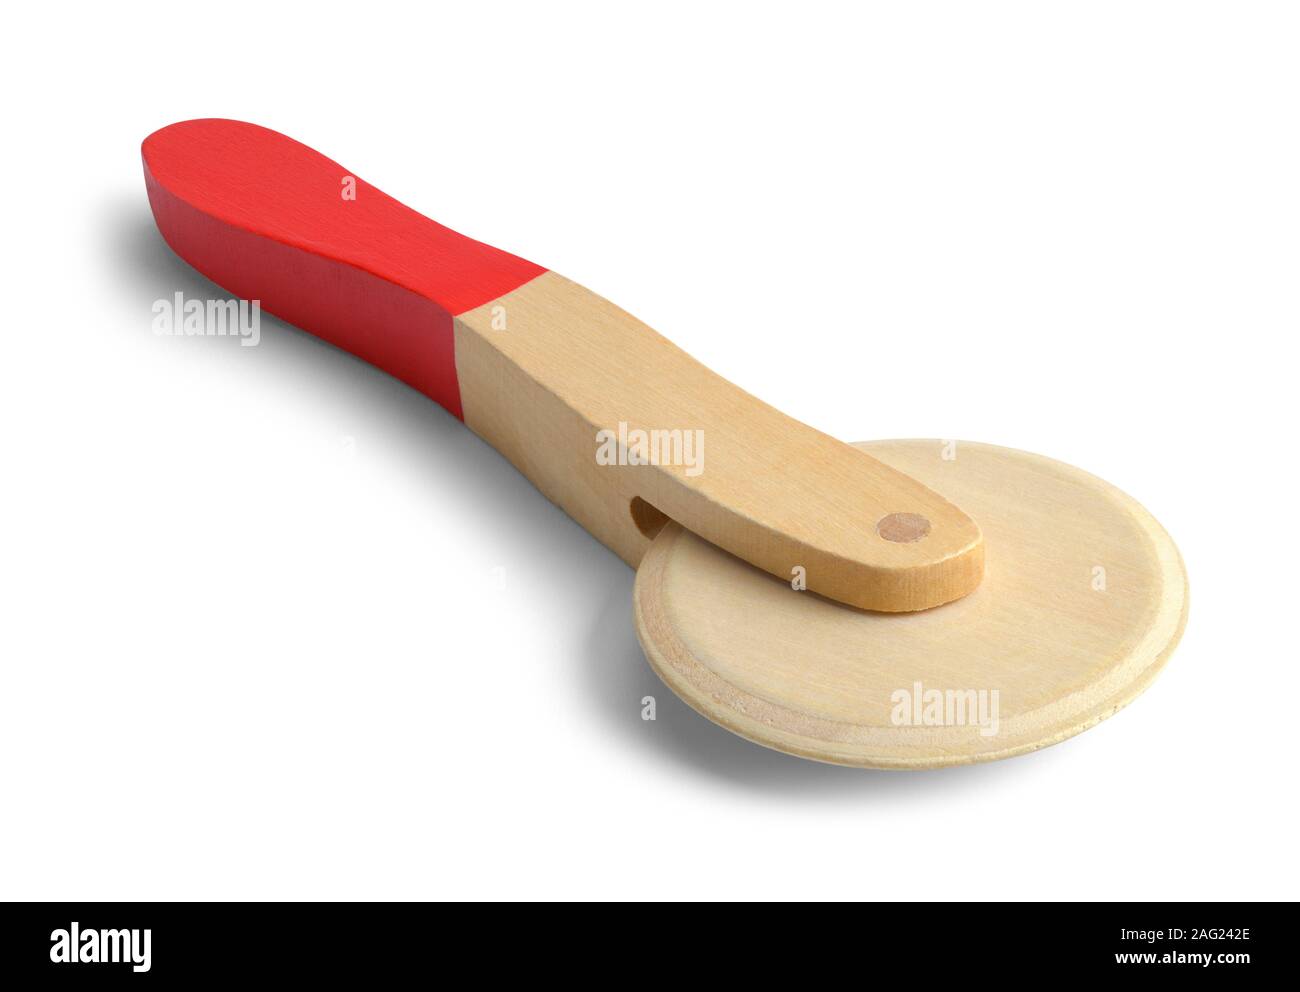 Wood Toy Pizza Cutter Isolated on White Background. Stock Photo